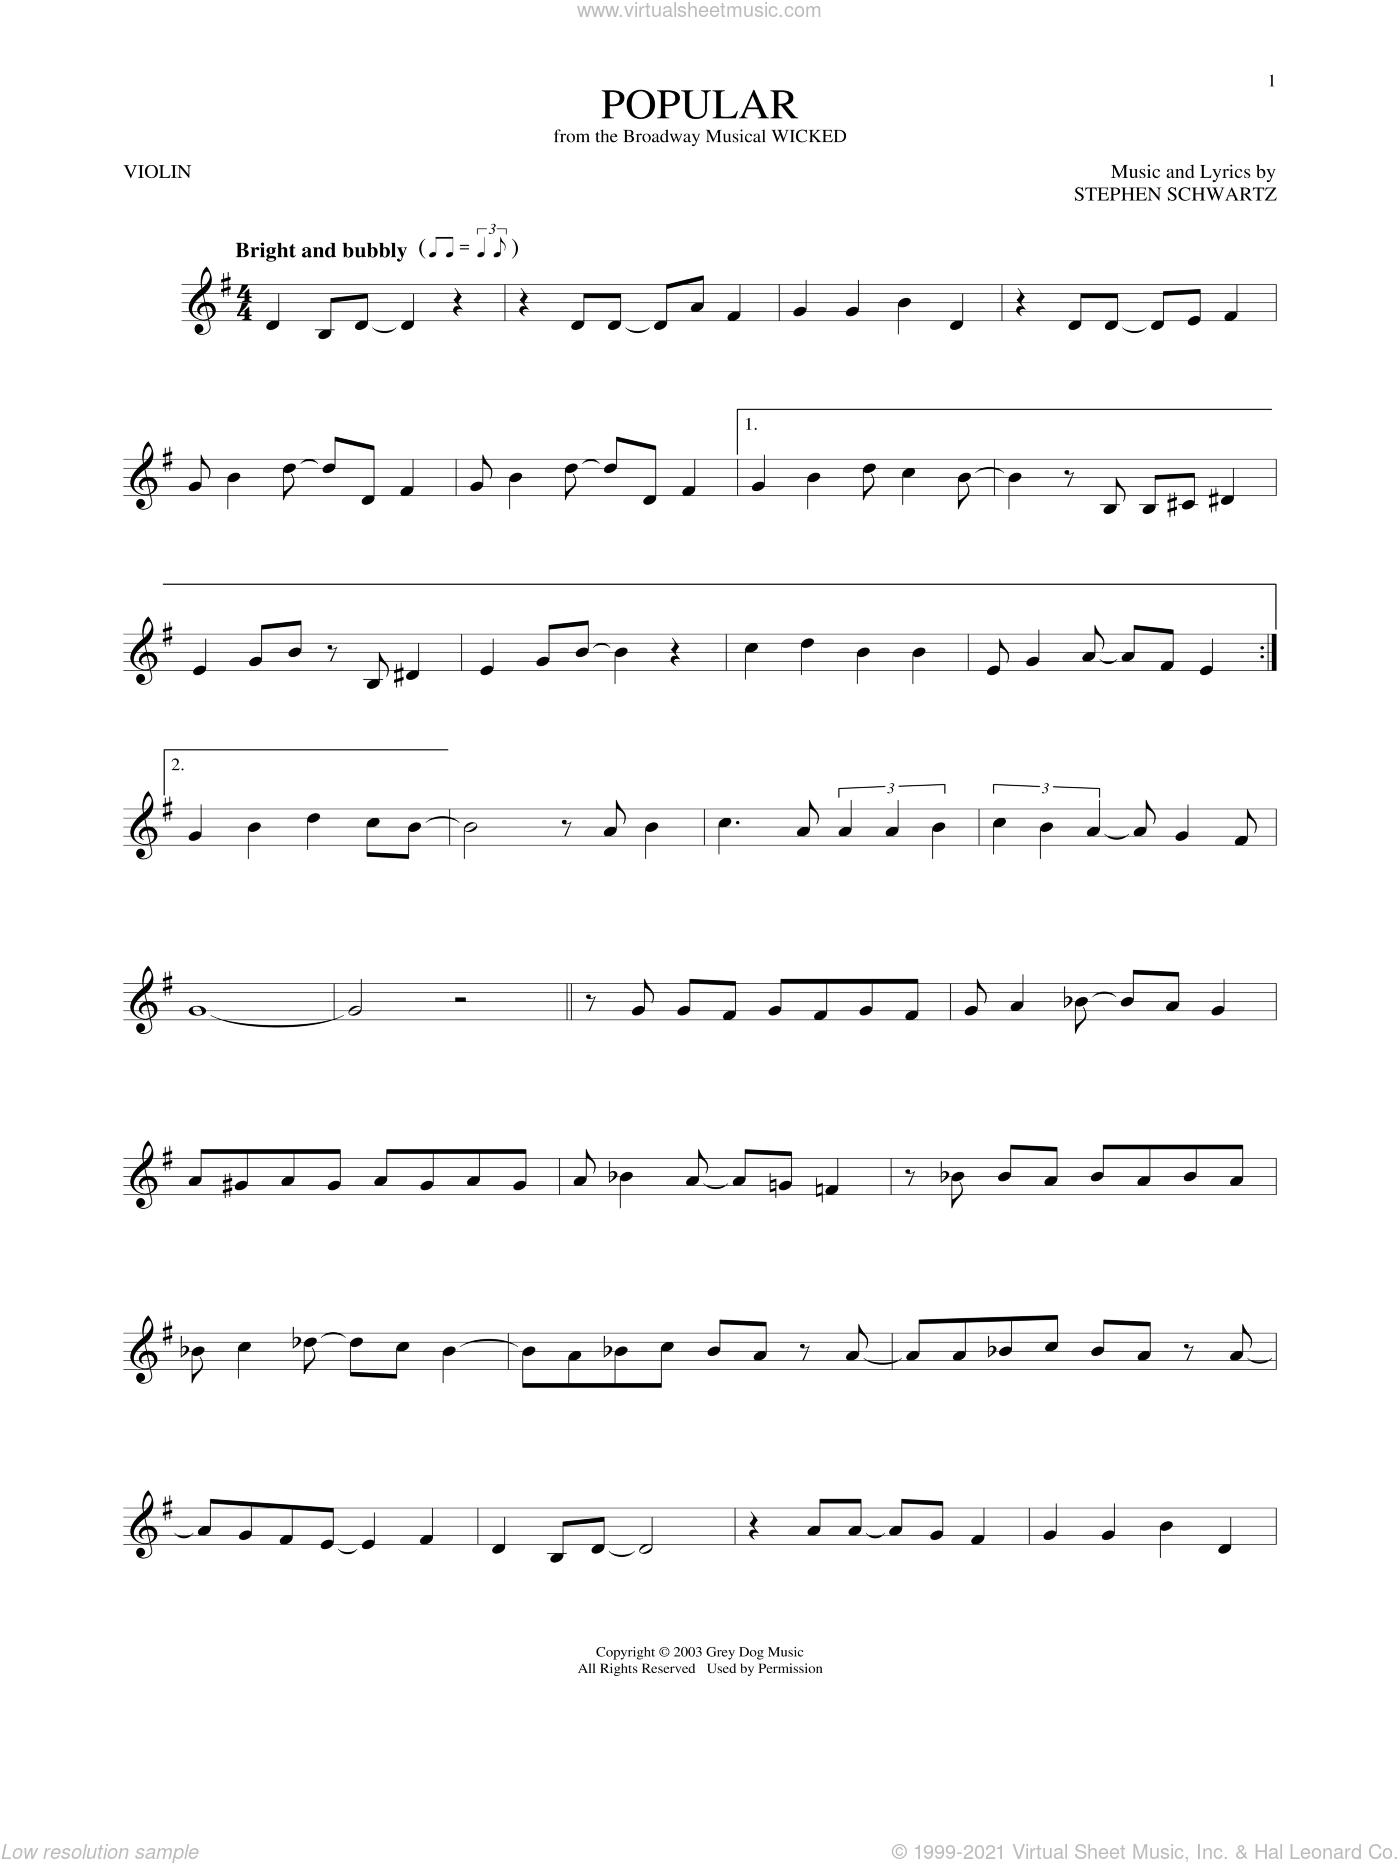 Schwartz - Popular (from Wicked) sheet music for violin solo